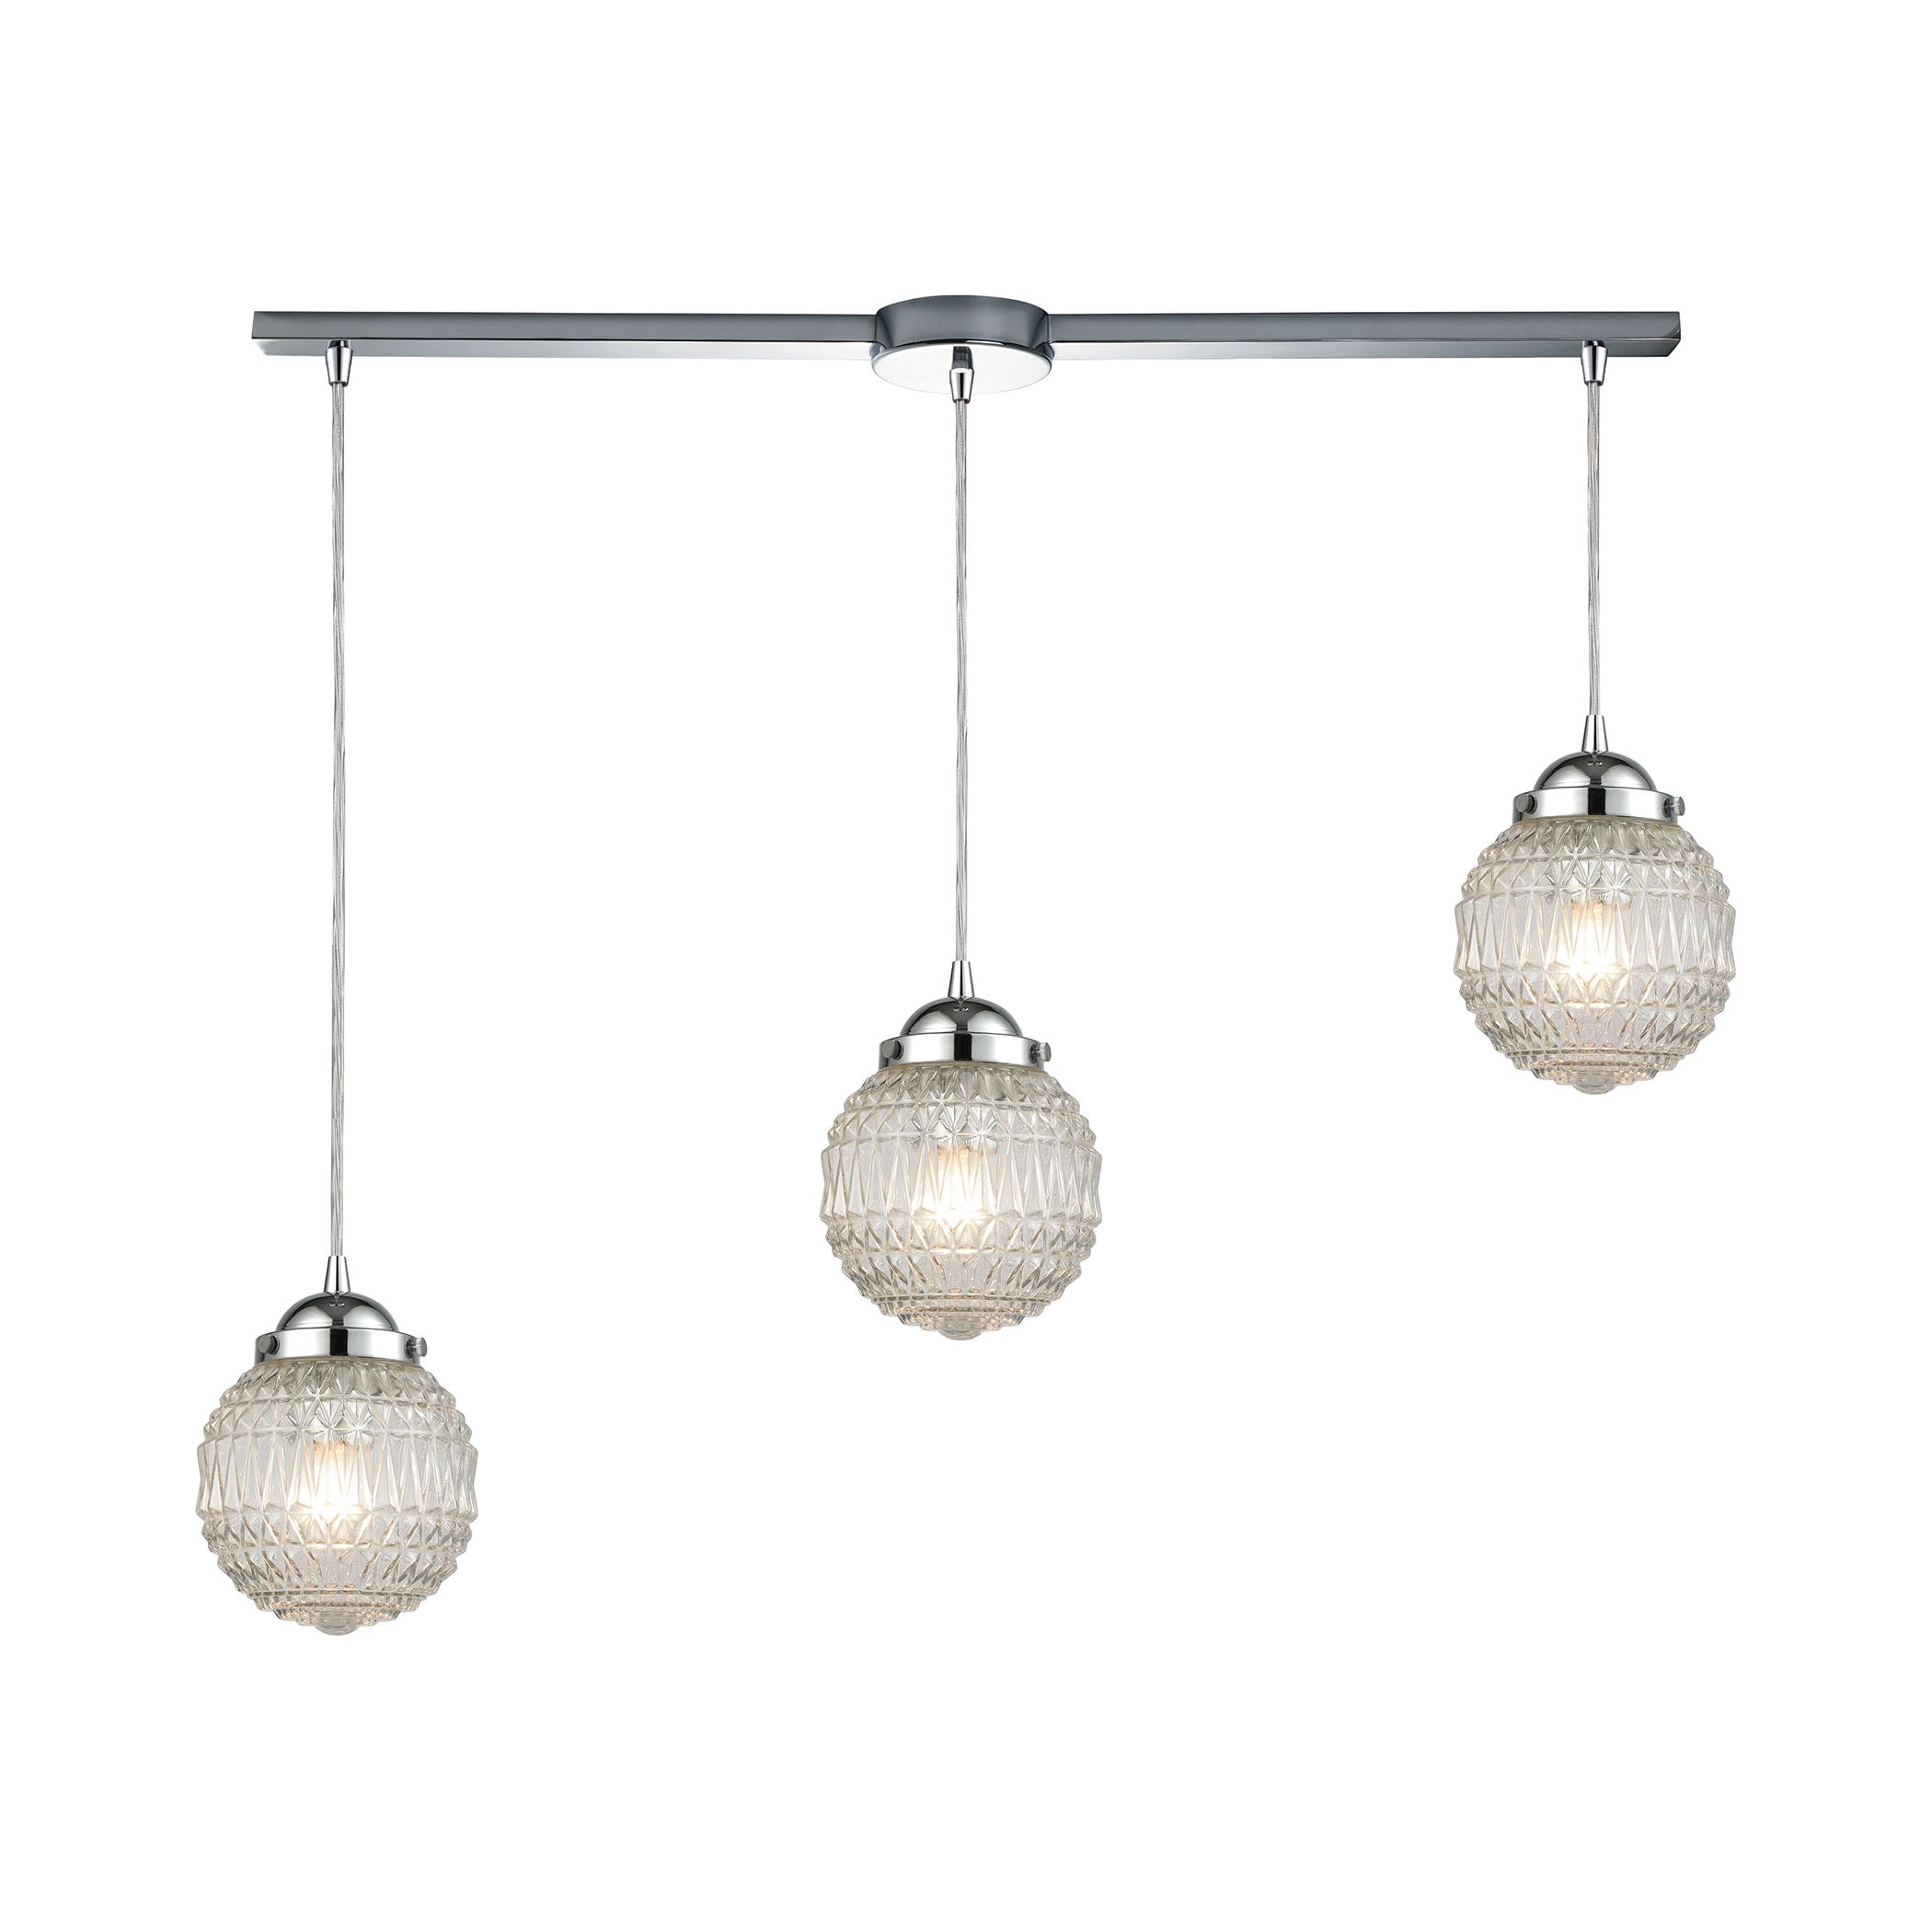 ELK Lighting 56591/3L Victoriana 3-Light Linear Mini Pendant Fixture in Polished Chrome with Clear Patterned Glass